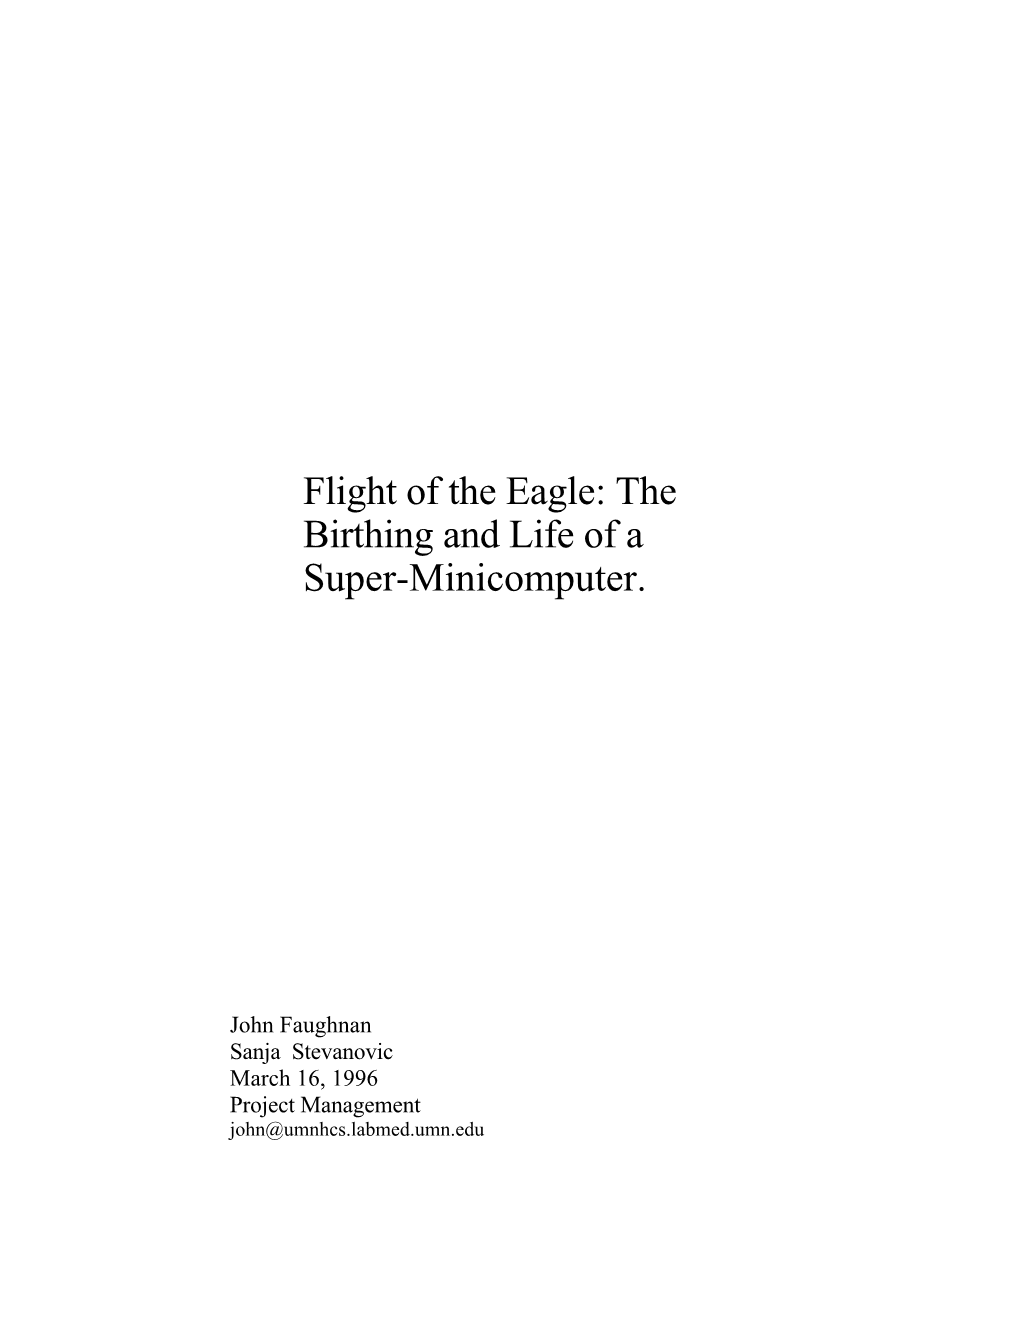 Flight of the Eagle: the Birthing and Life of a Super-Minicomputer